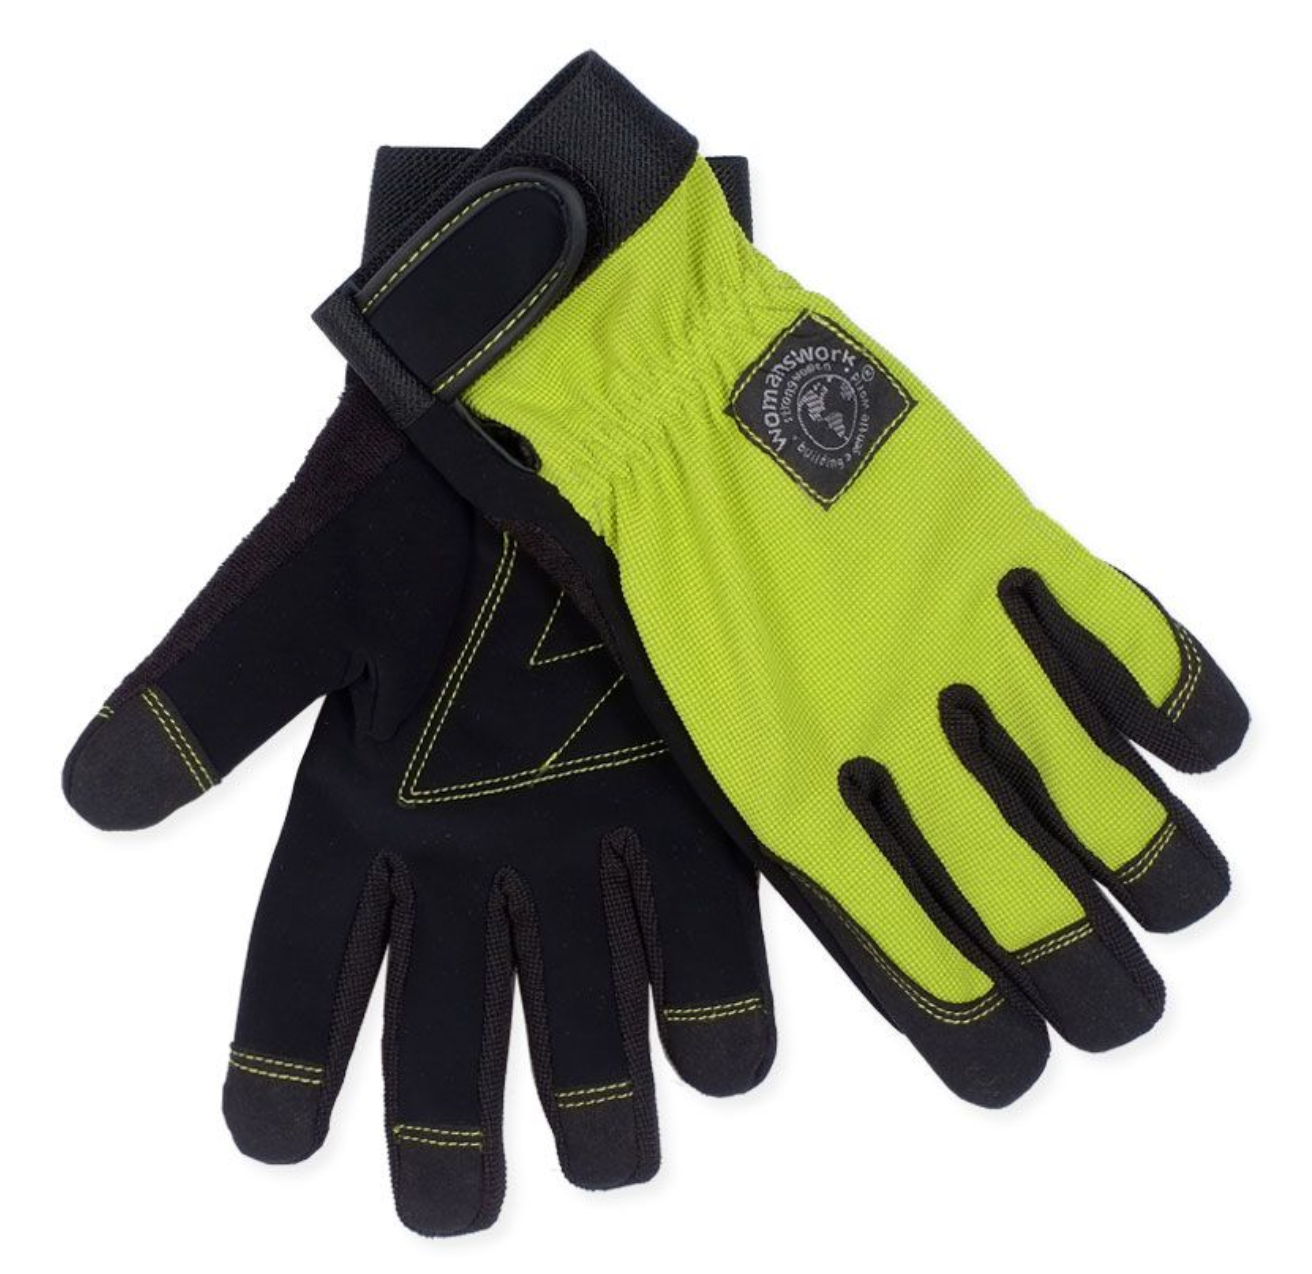 Digger Gloves by Womans Work, green